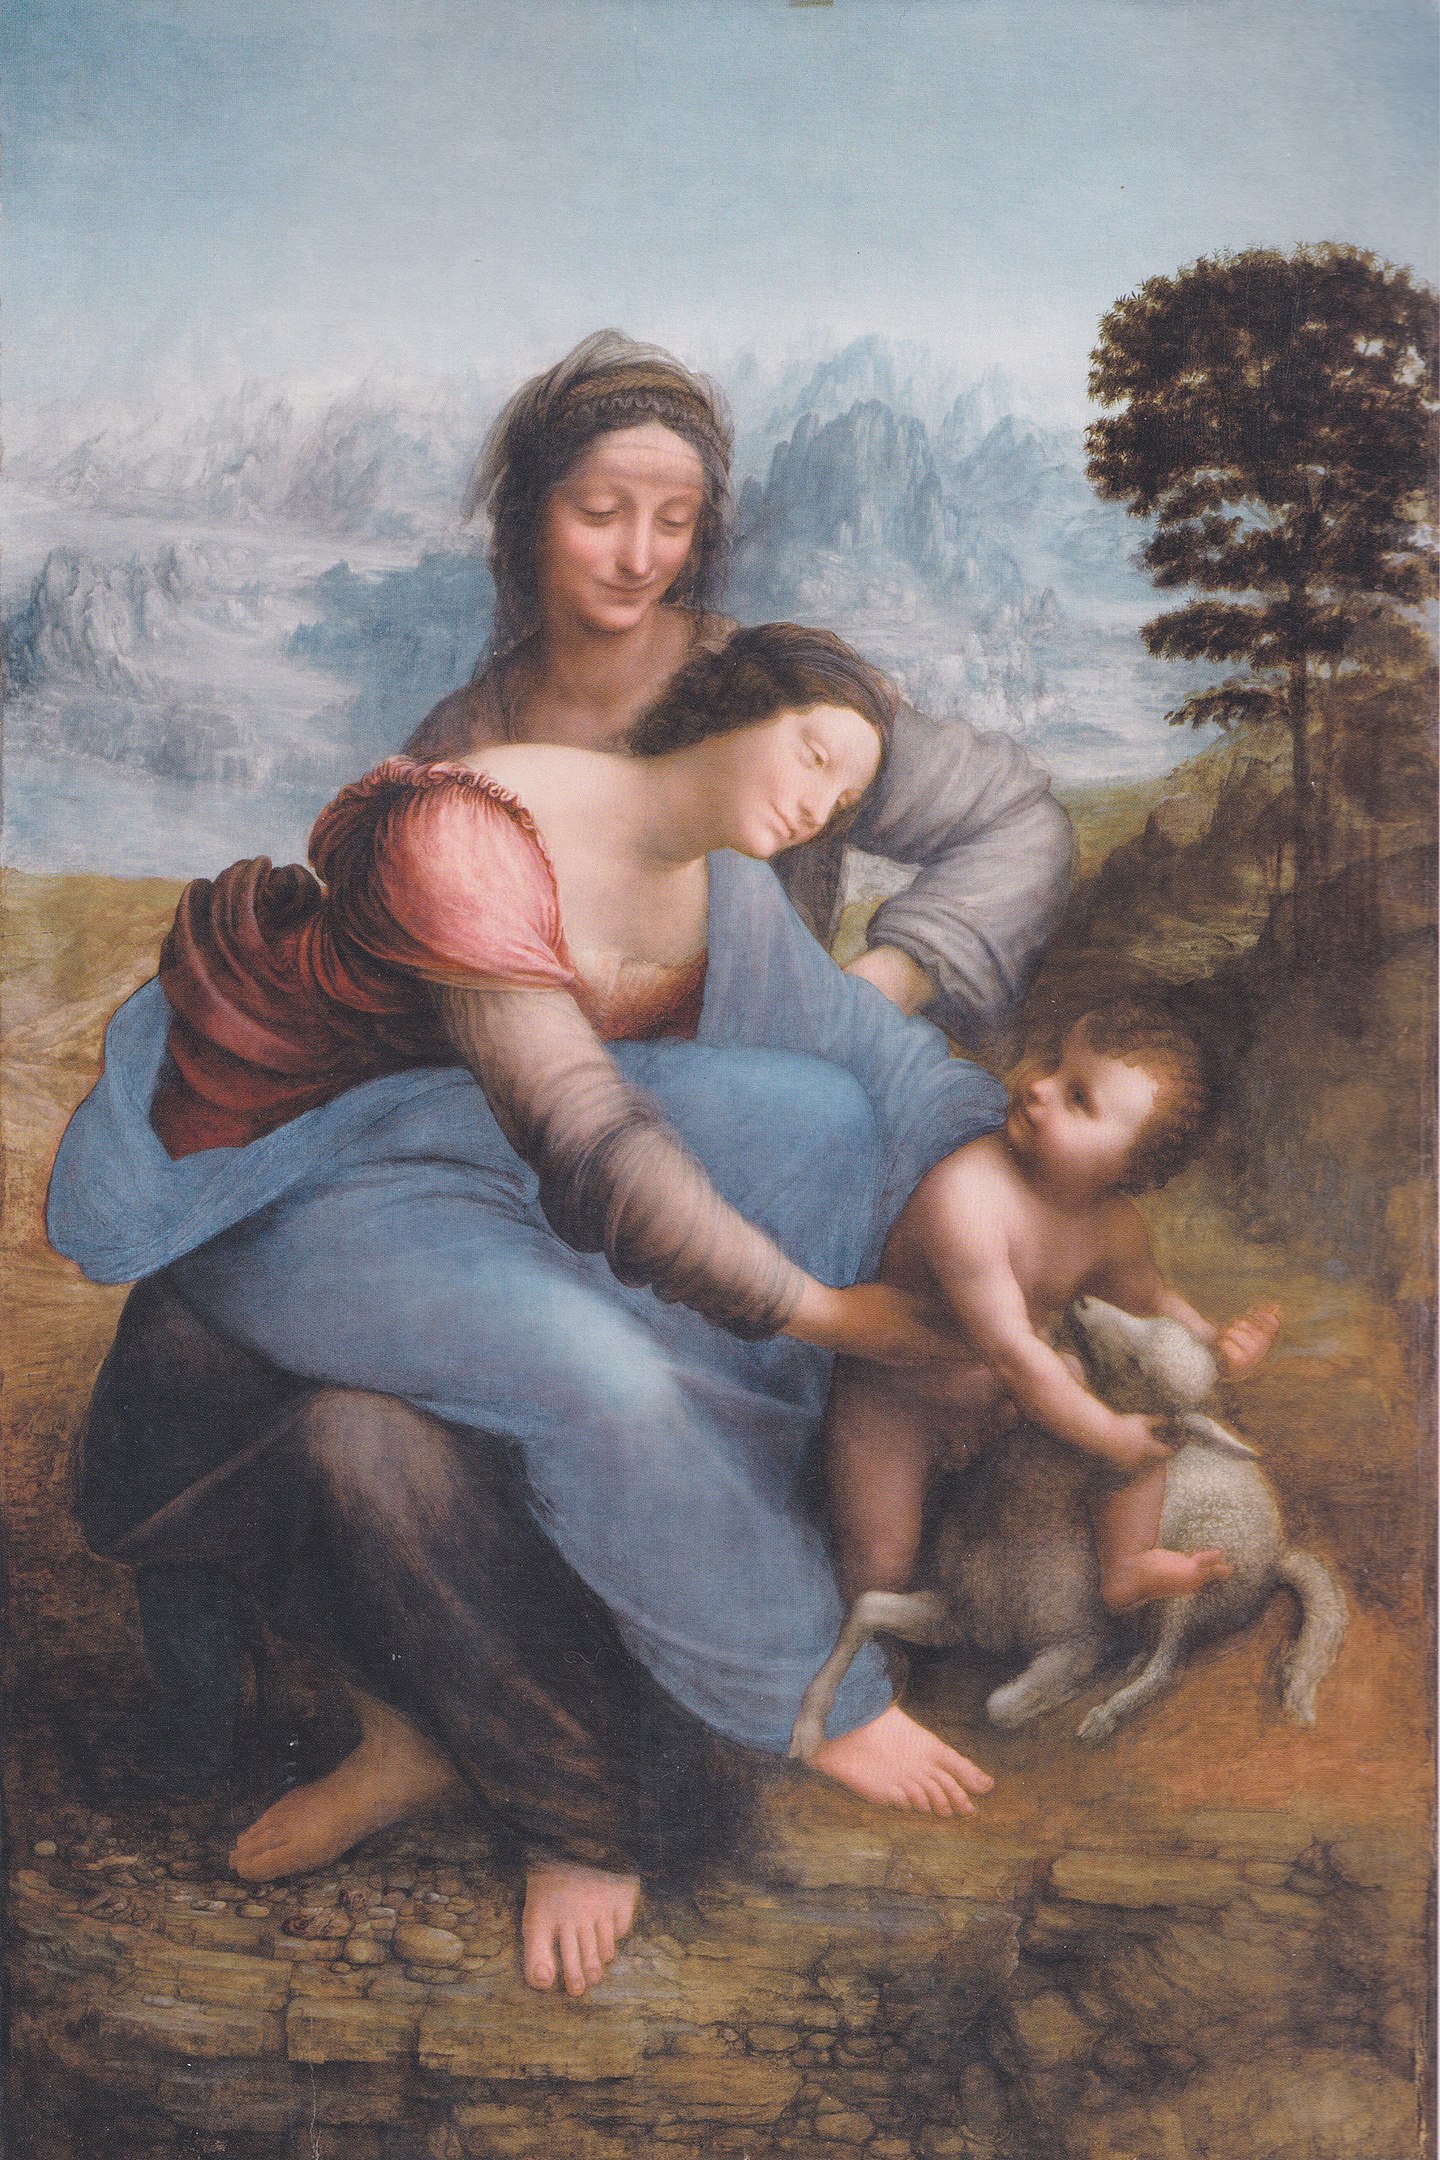 A woman extending her arms out towards an infant child playing with a lamb in a classical landscape as another woman watches them